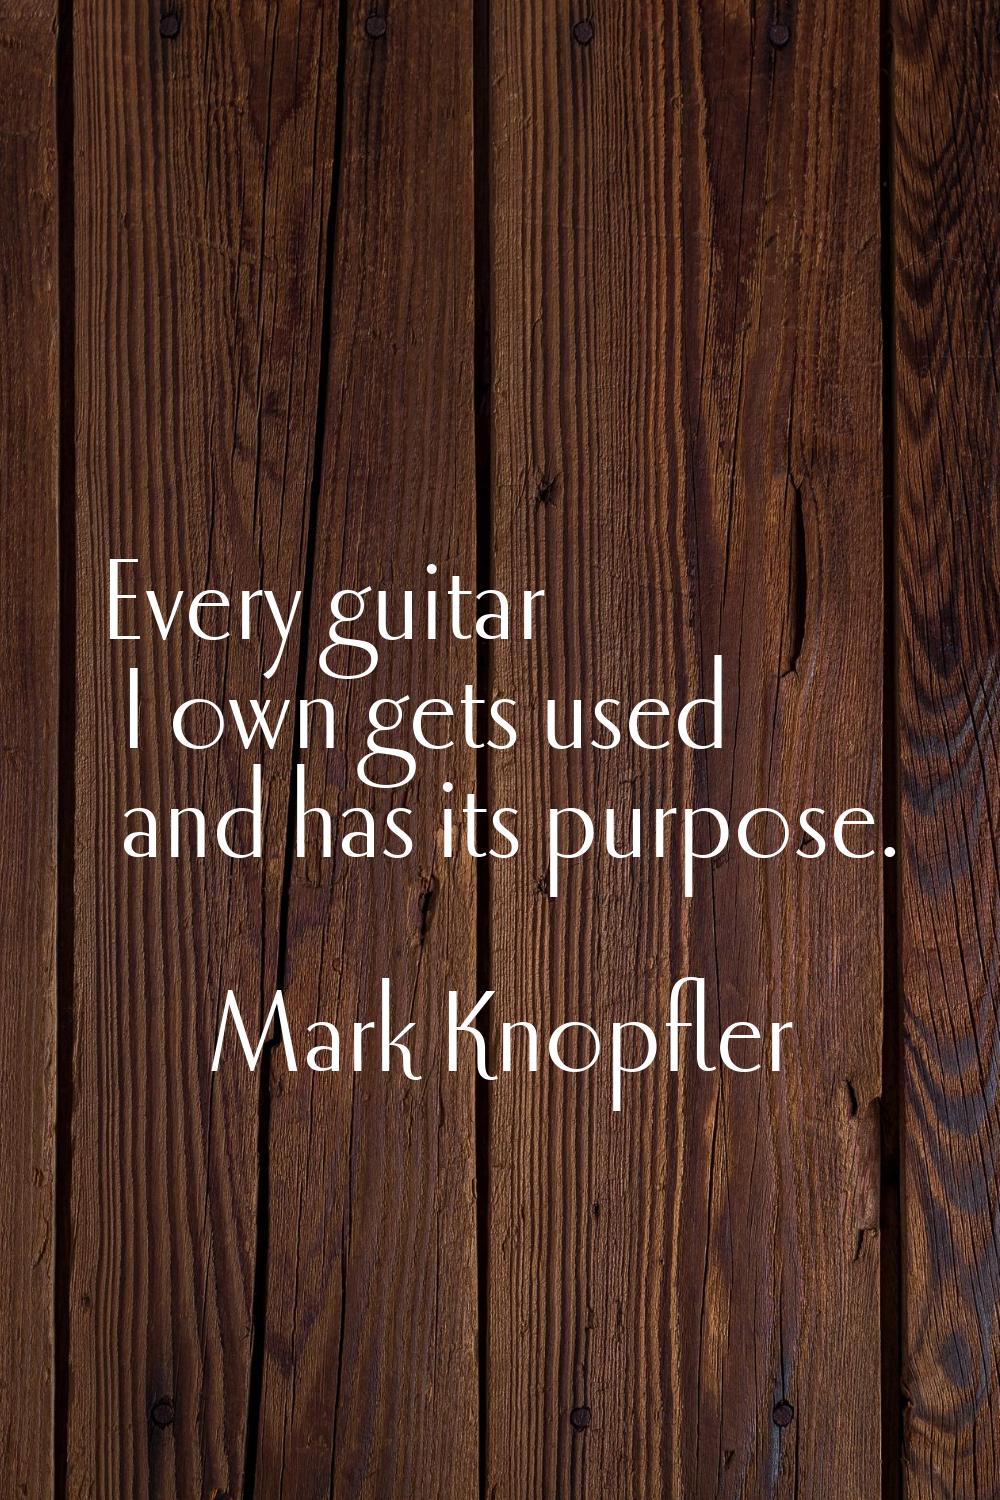 Every guitar I own gets used and has its purpose.